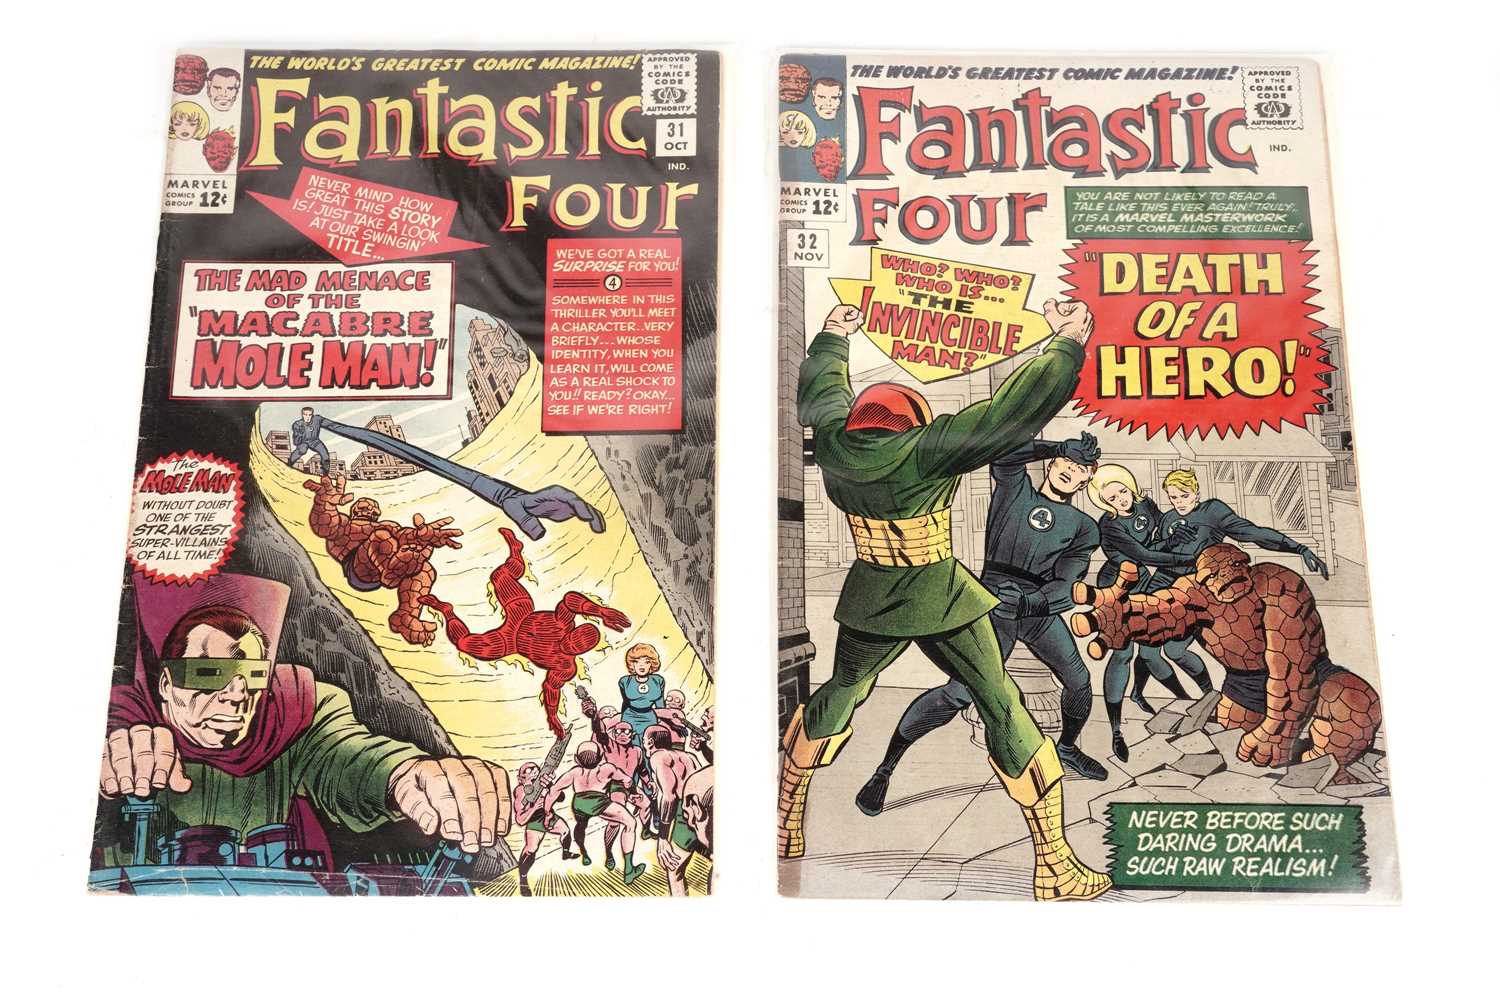 The Fantastic Four No’s. 31 and 32 by Marvel Comics